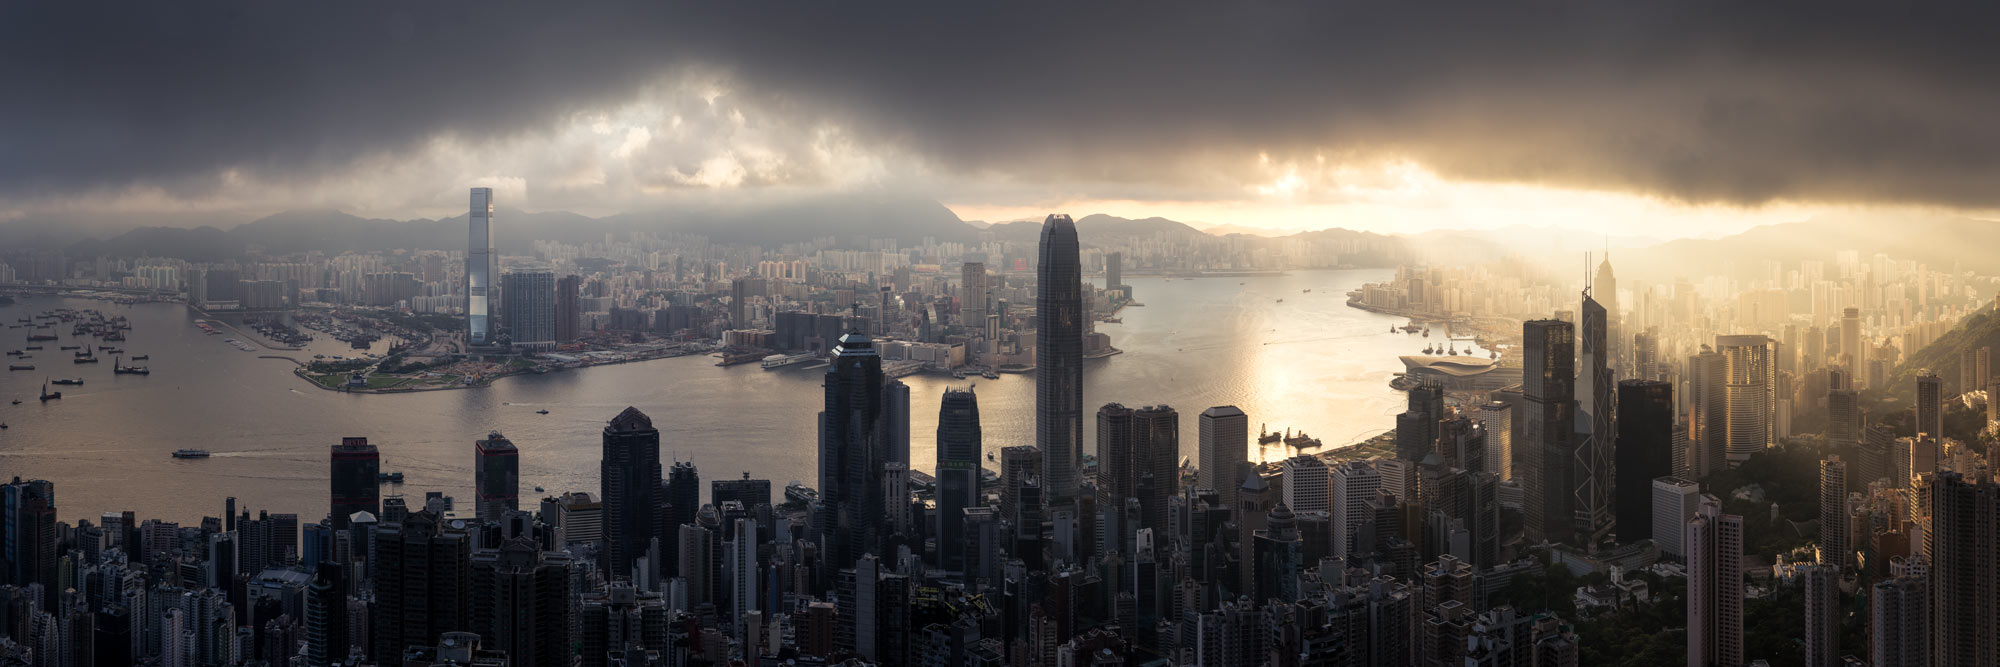 Hong Kong Cityscape from the Peak